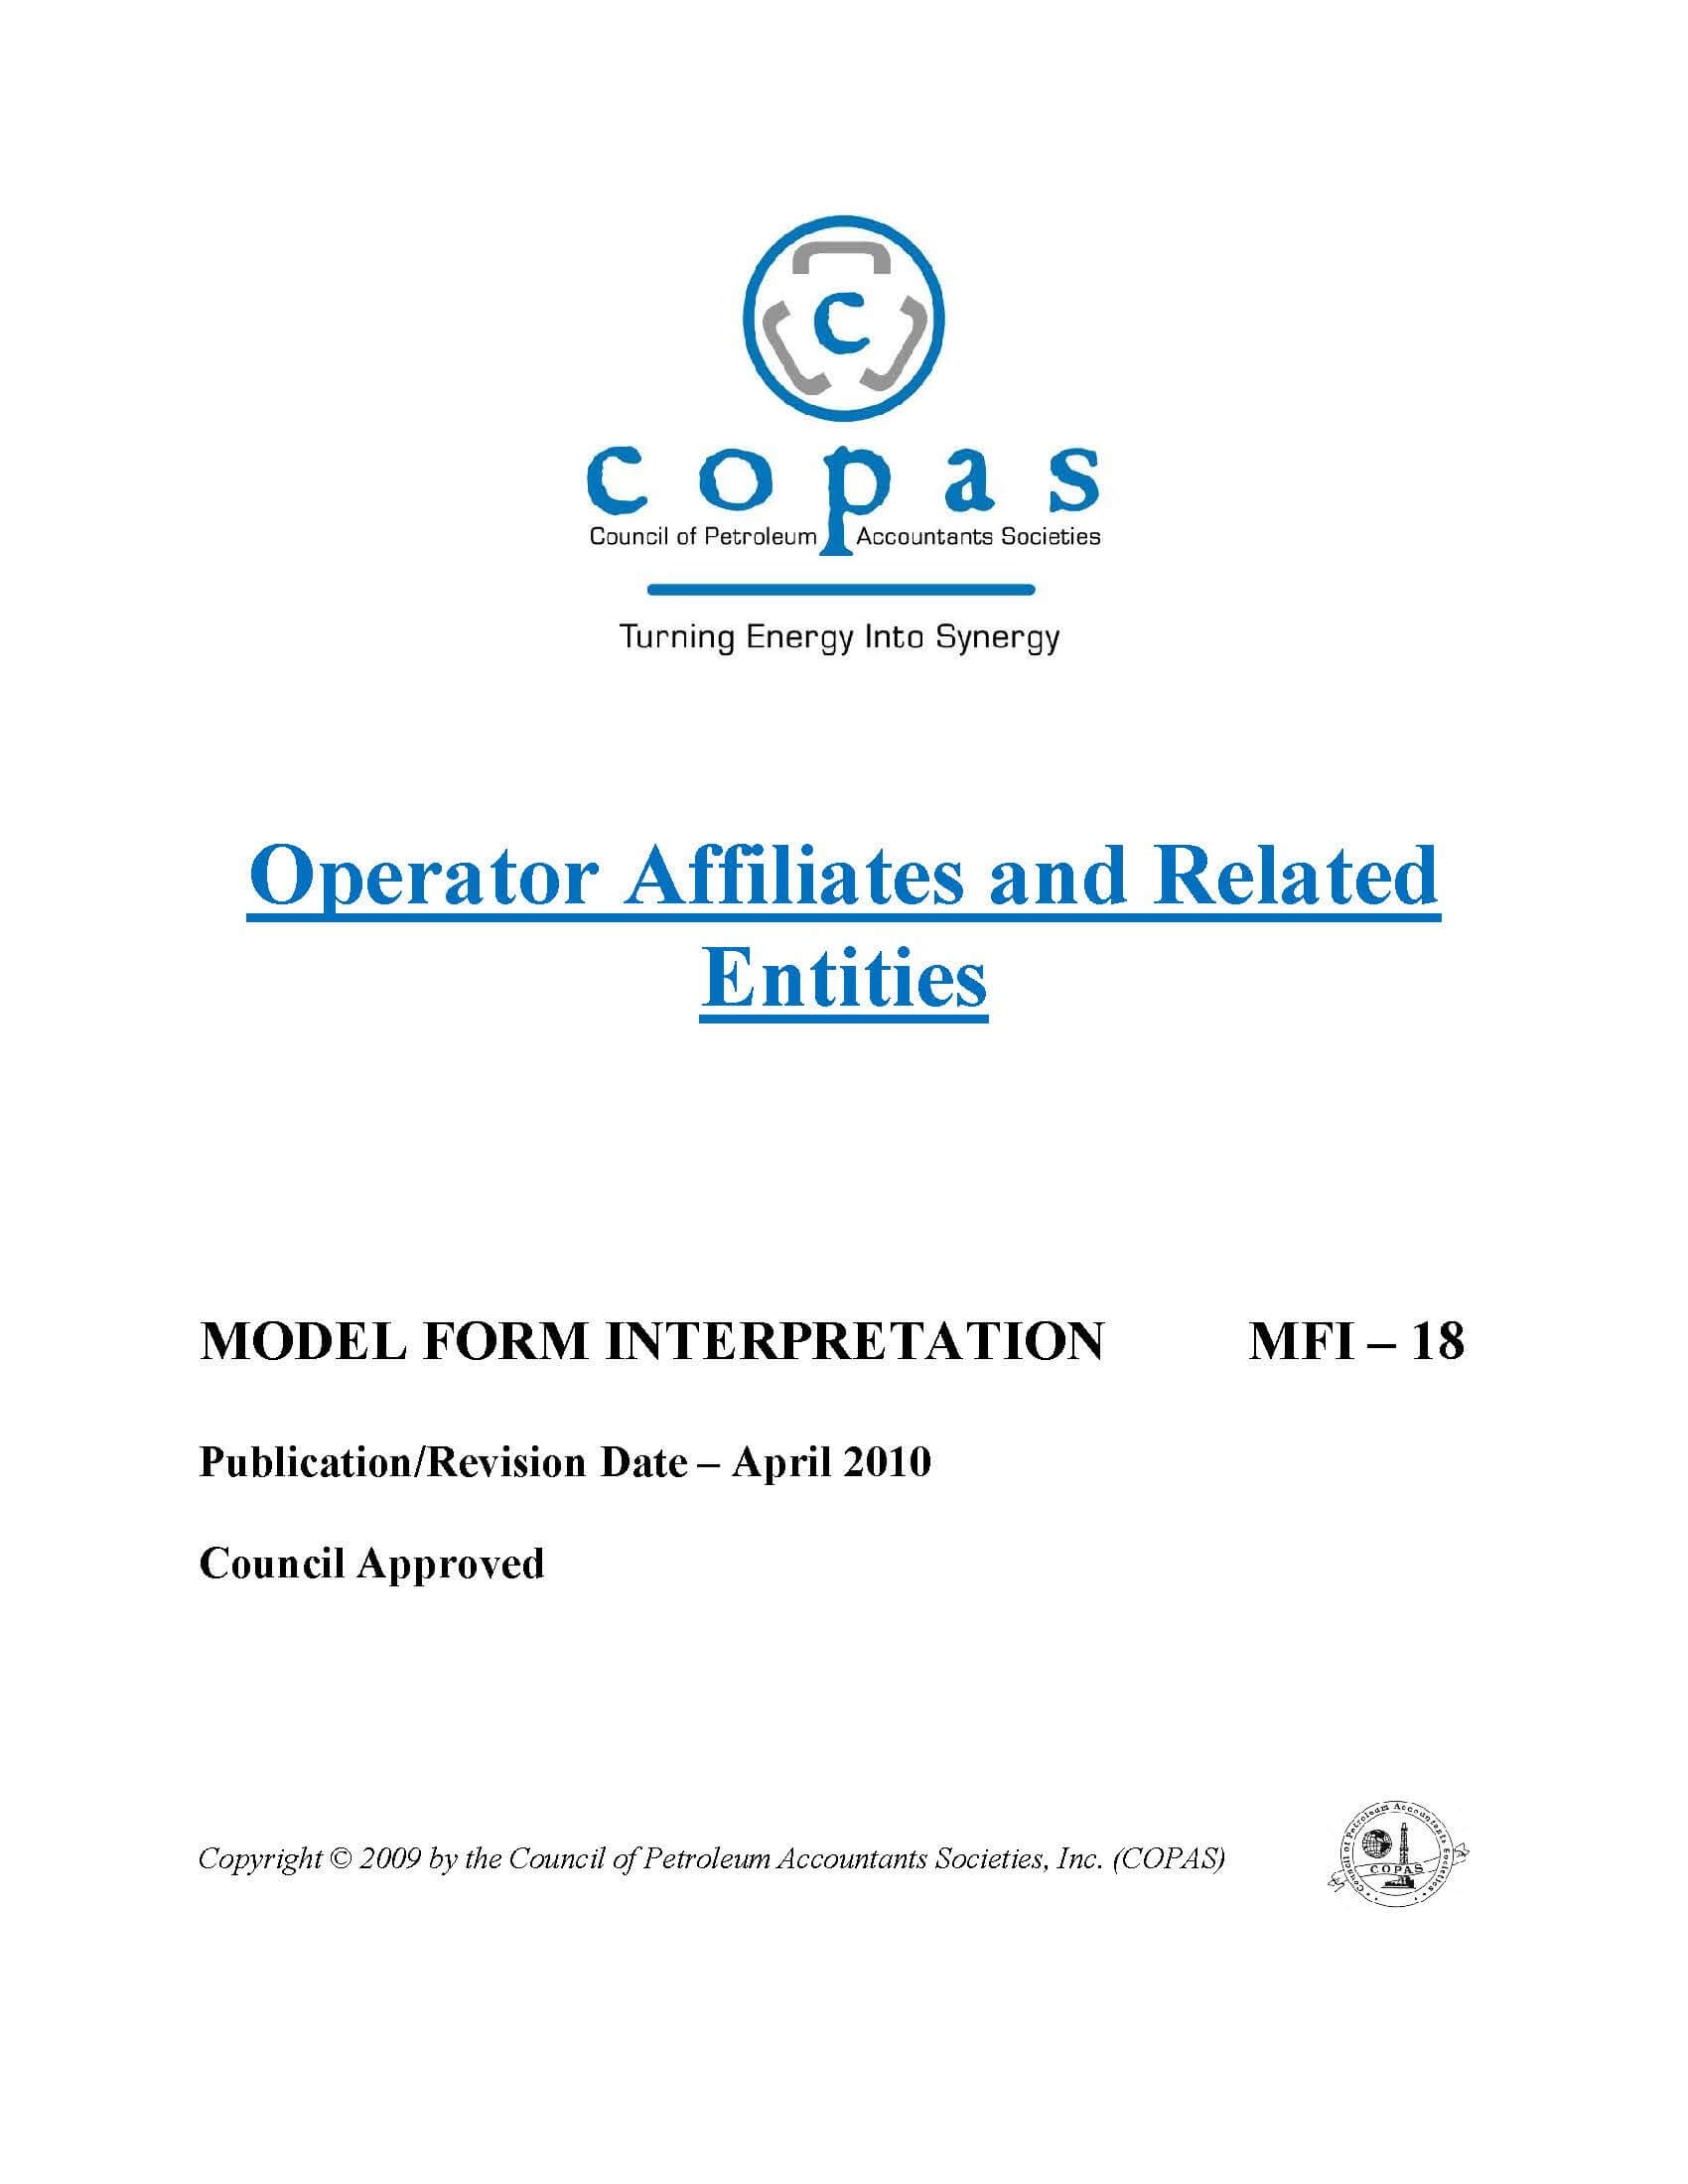 MFI-18 Operator Affiliates and Related Entities - products MFI 18 Operator Affiliates and Related Entities - Council of Petroleum Accountants Societies